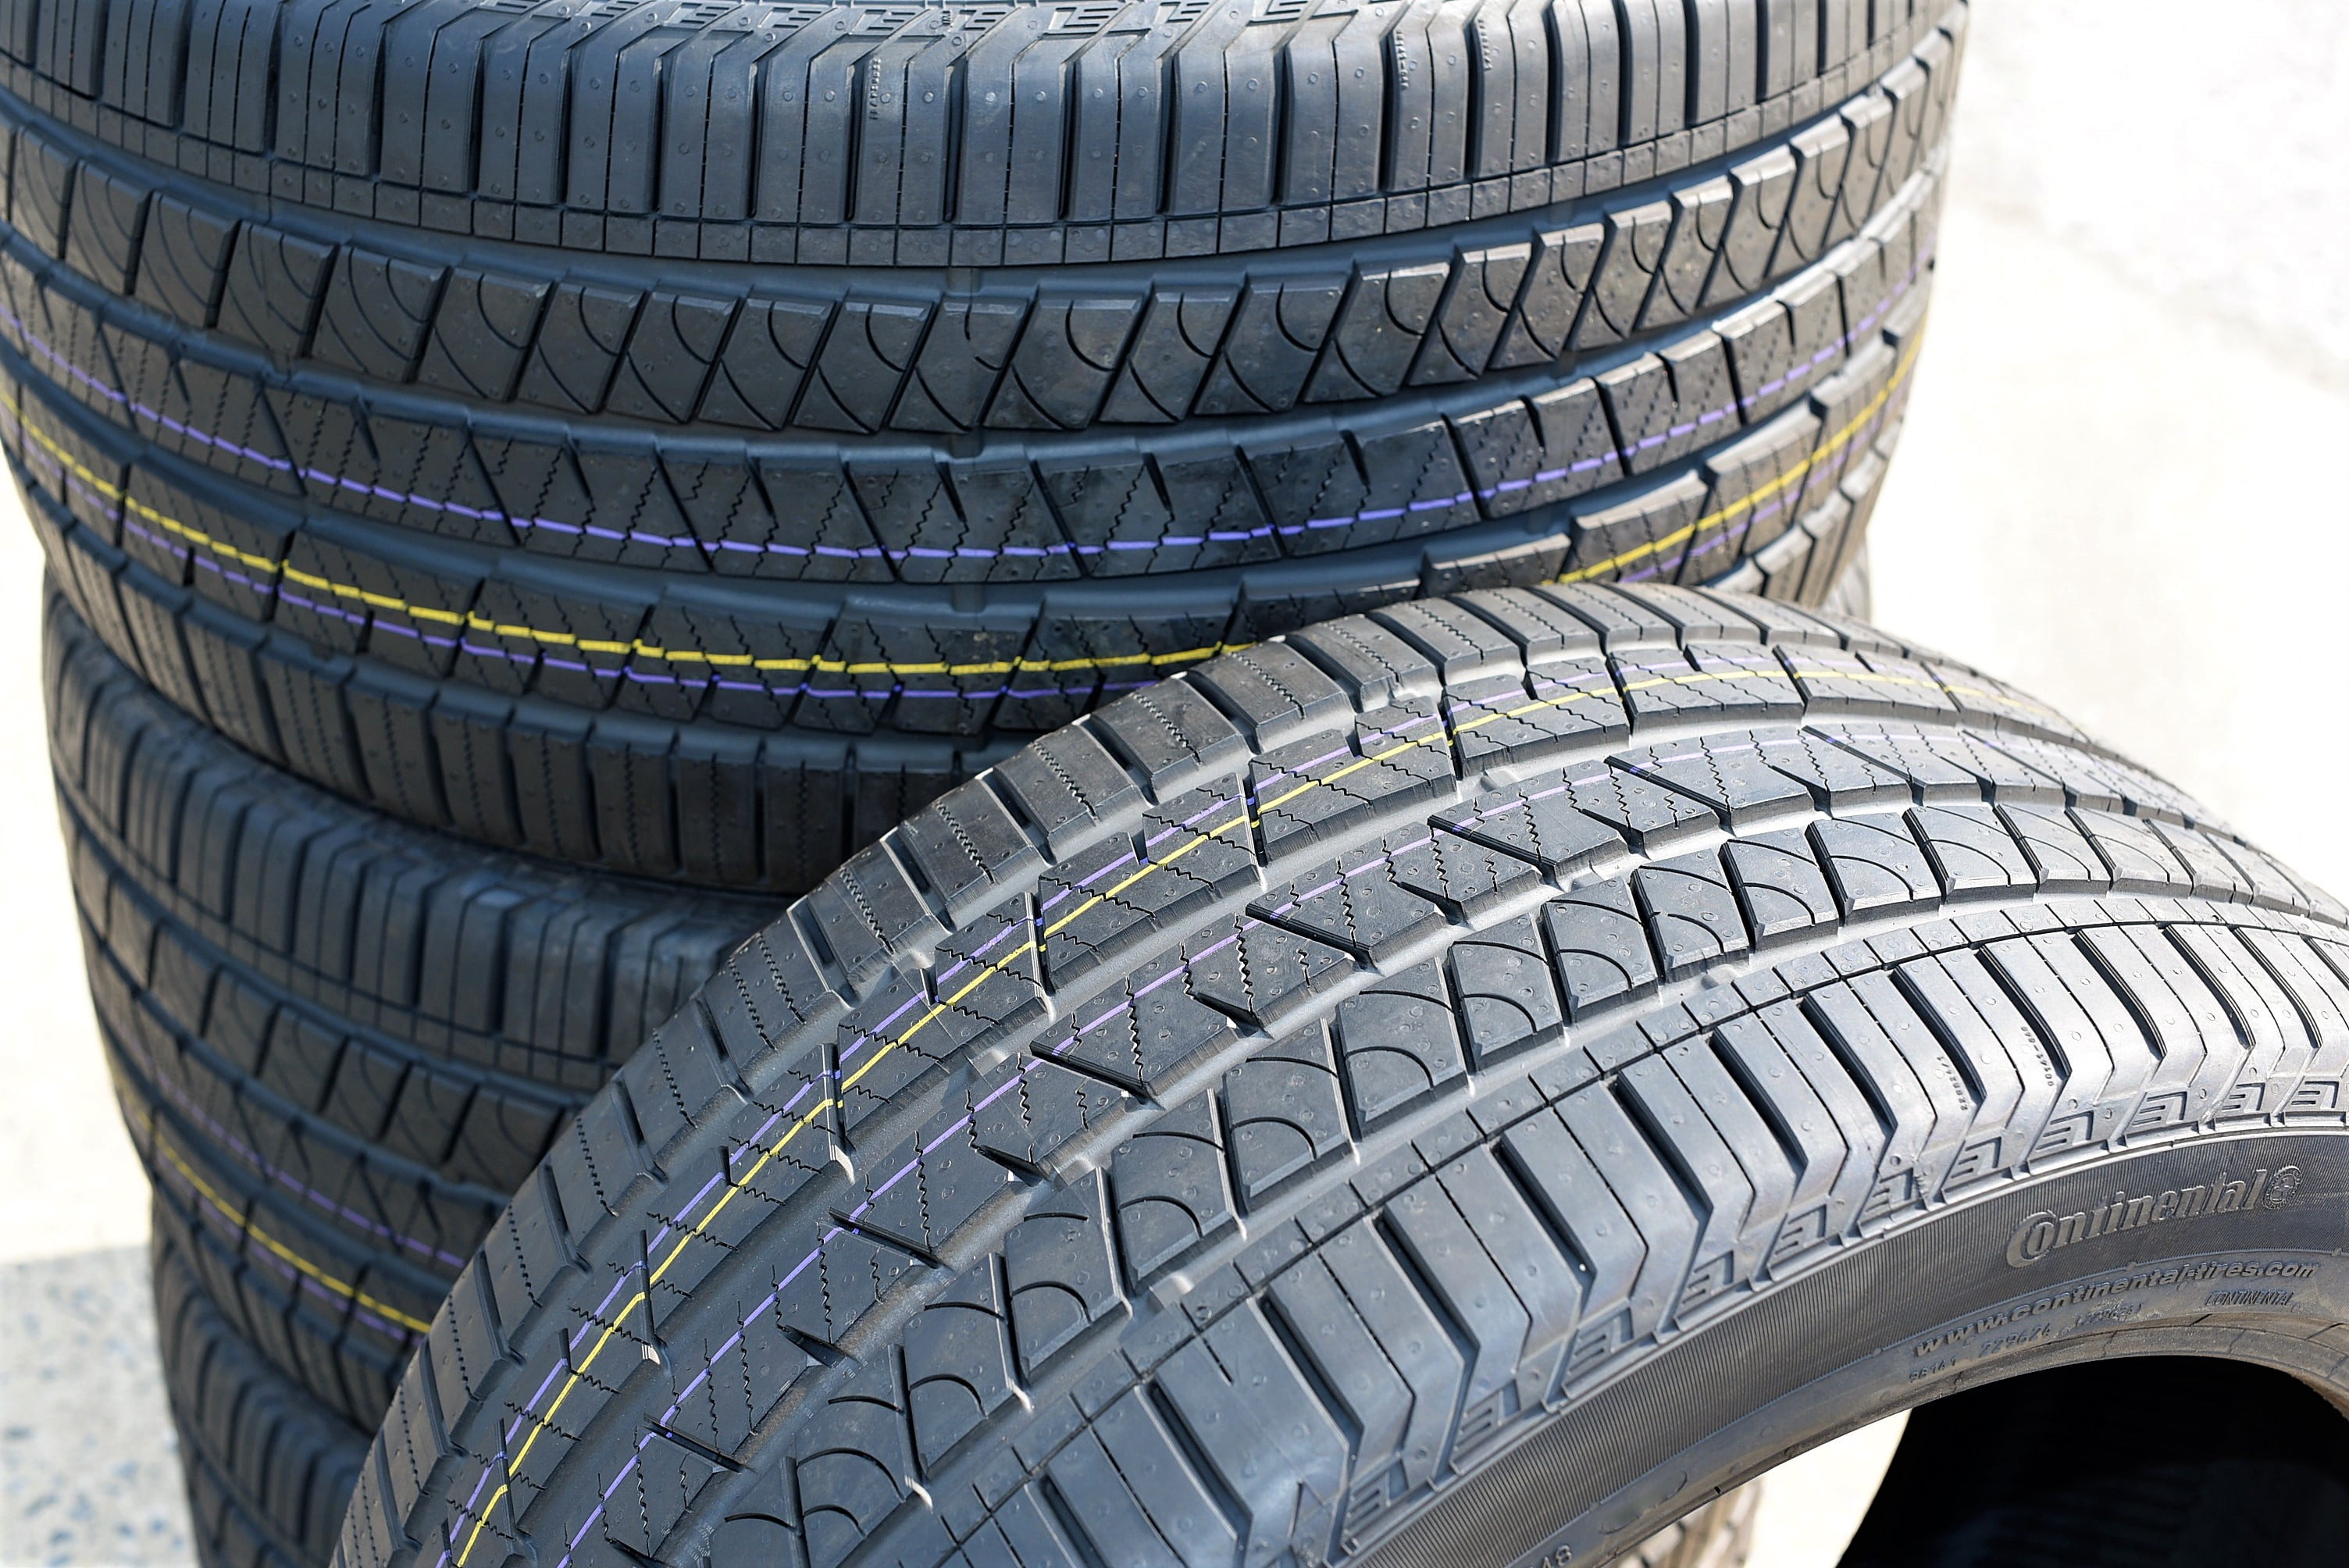 275/45R20 Fits: Tire 2019 Sport XL Ford xDrive40i, LX 110V ContiSilent X5 BMW (T1) A/S Harley-Davidson Continental F-150 CrossContact Edition 2000-03